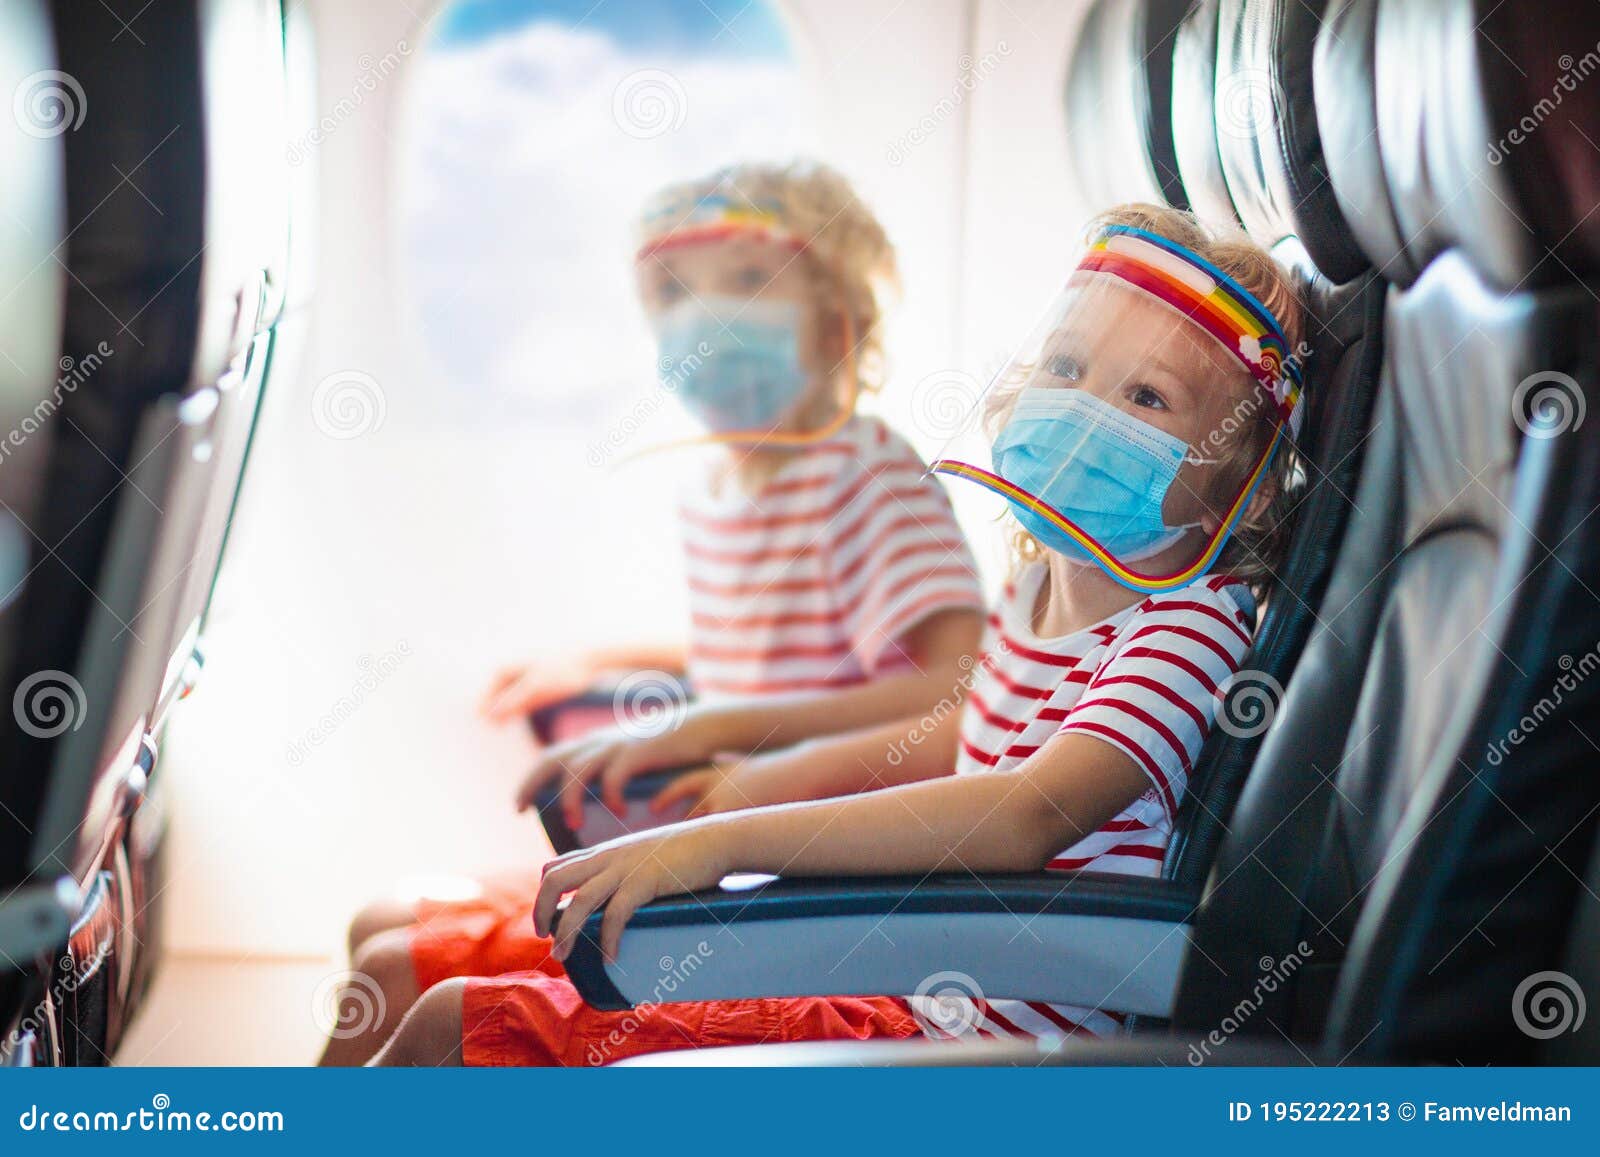 child in airplane in face mask. virus outbreak